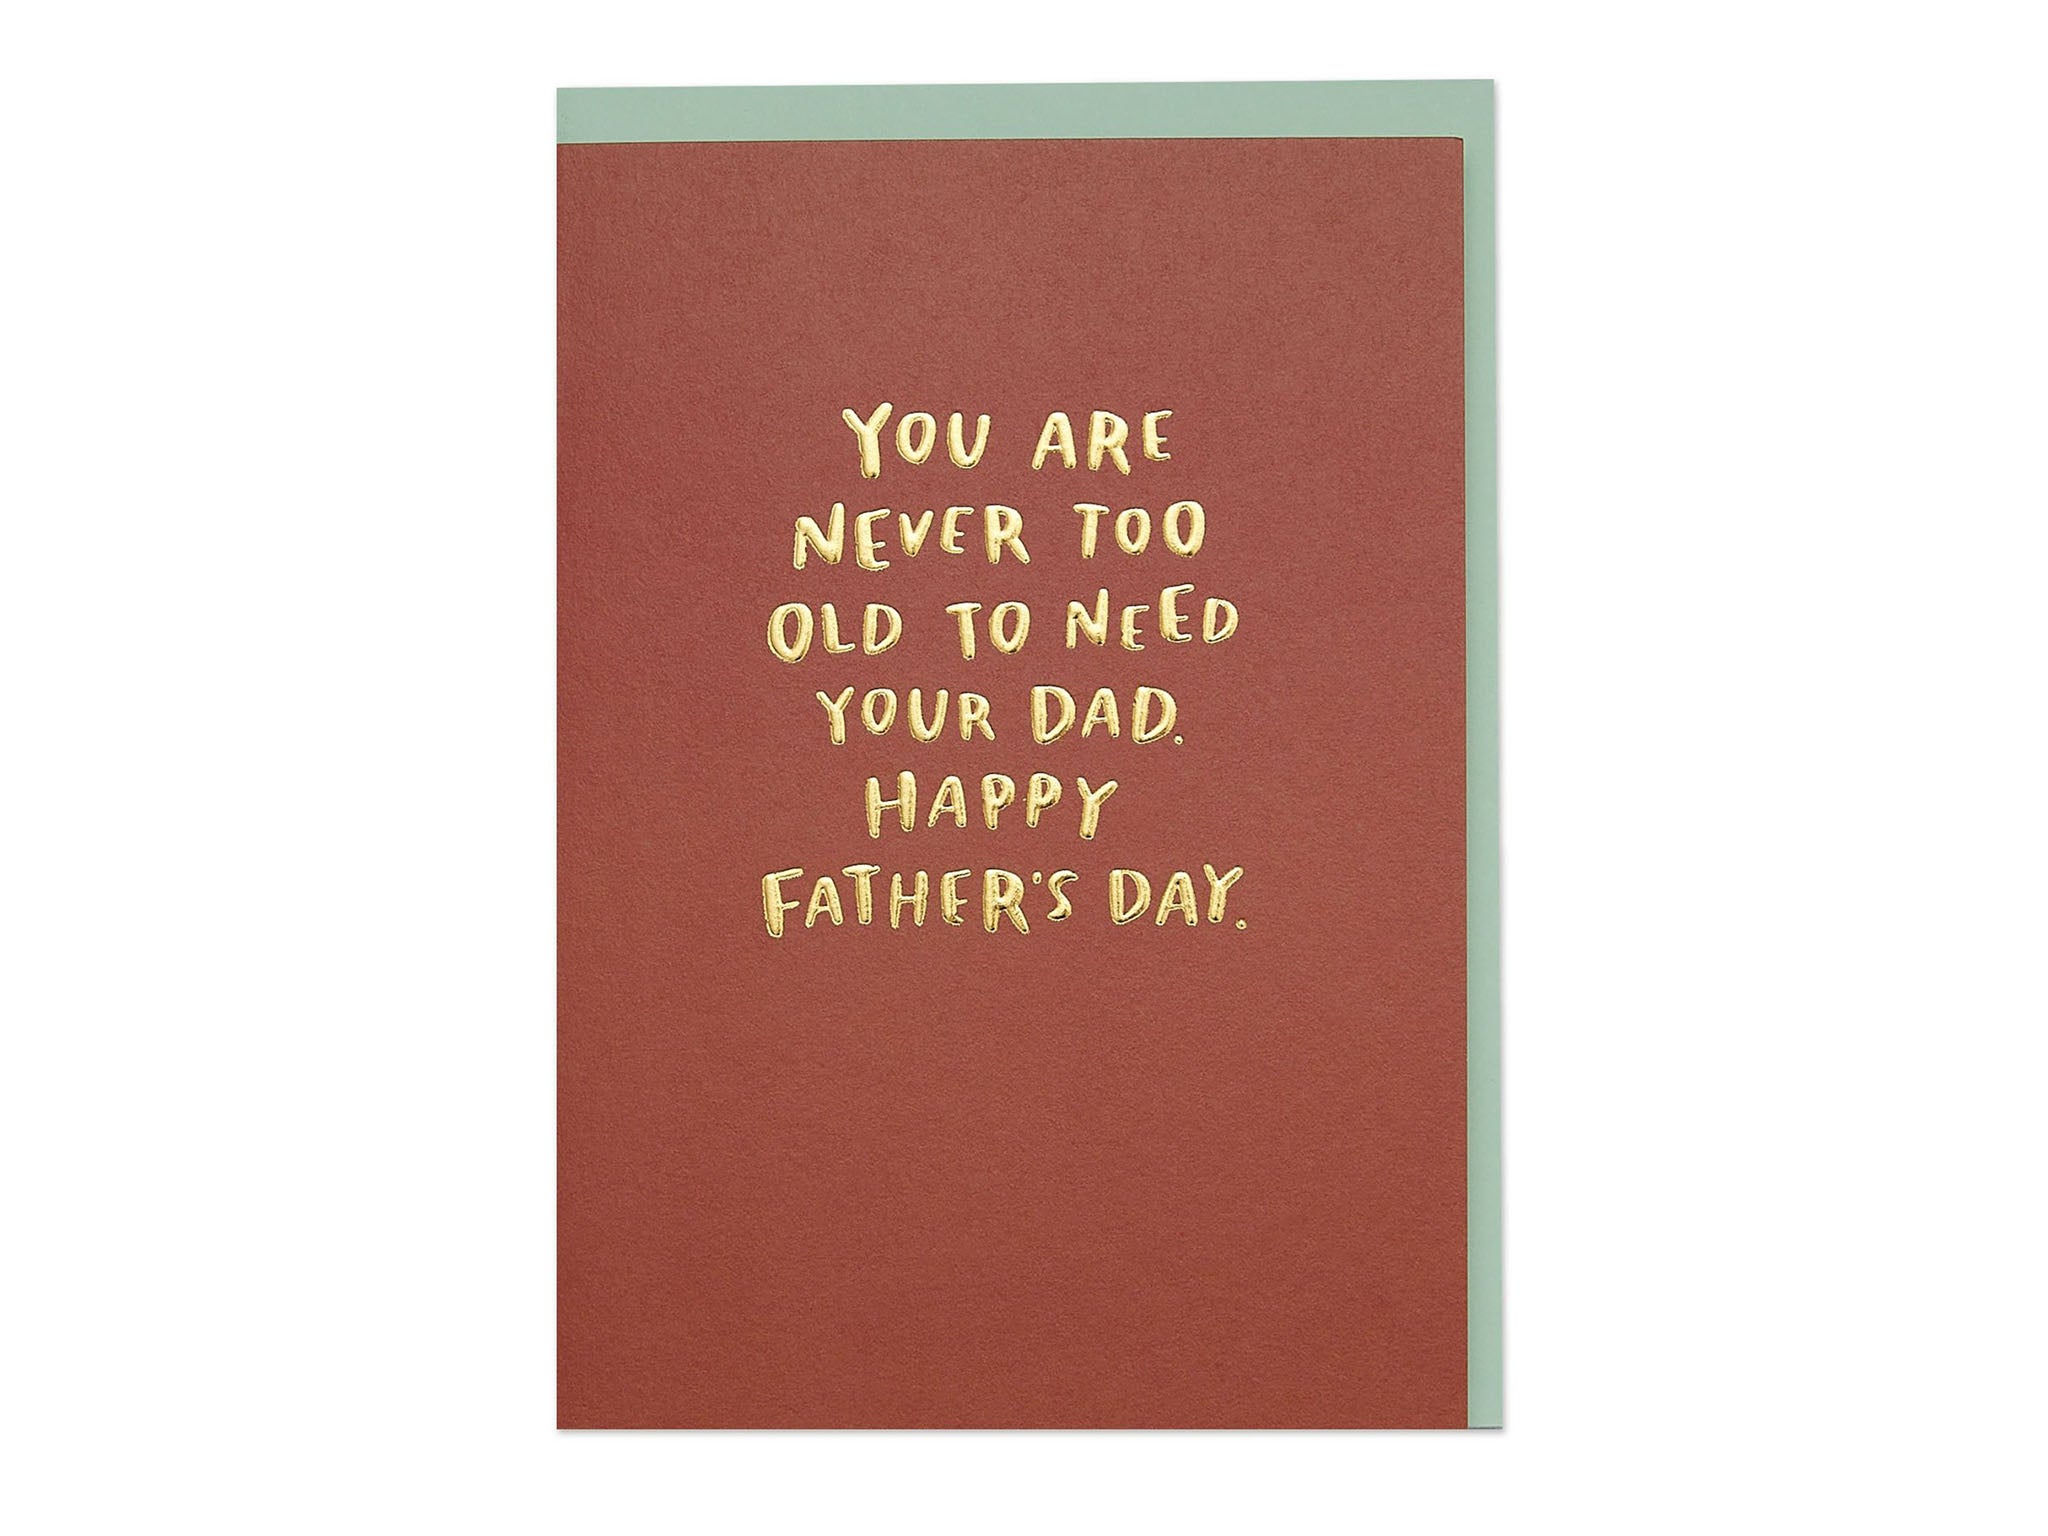 fathers-day-card-thoughtful-indybest.jpeg